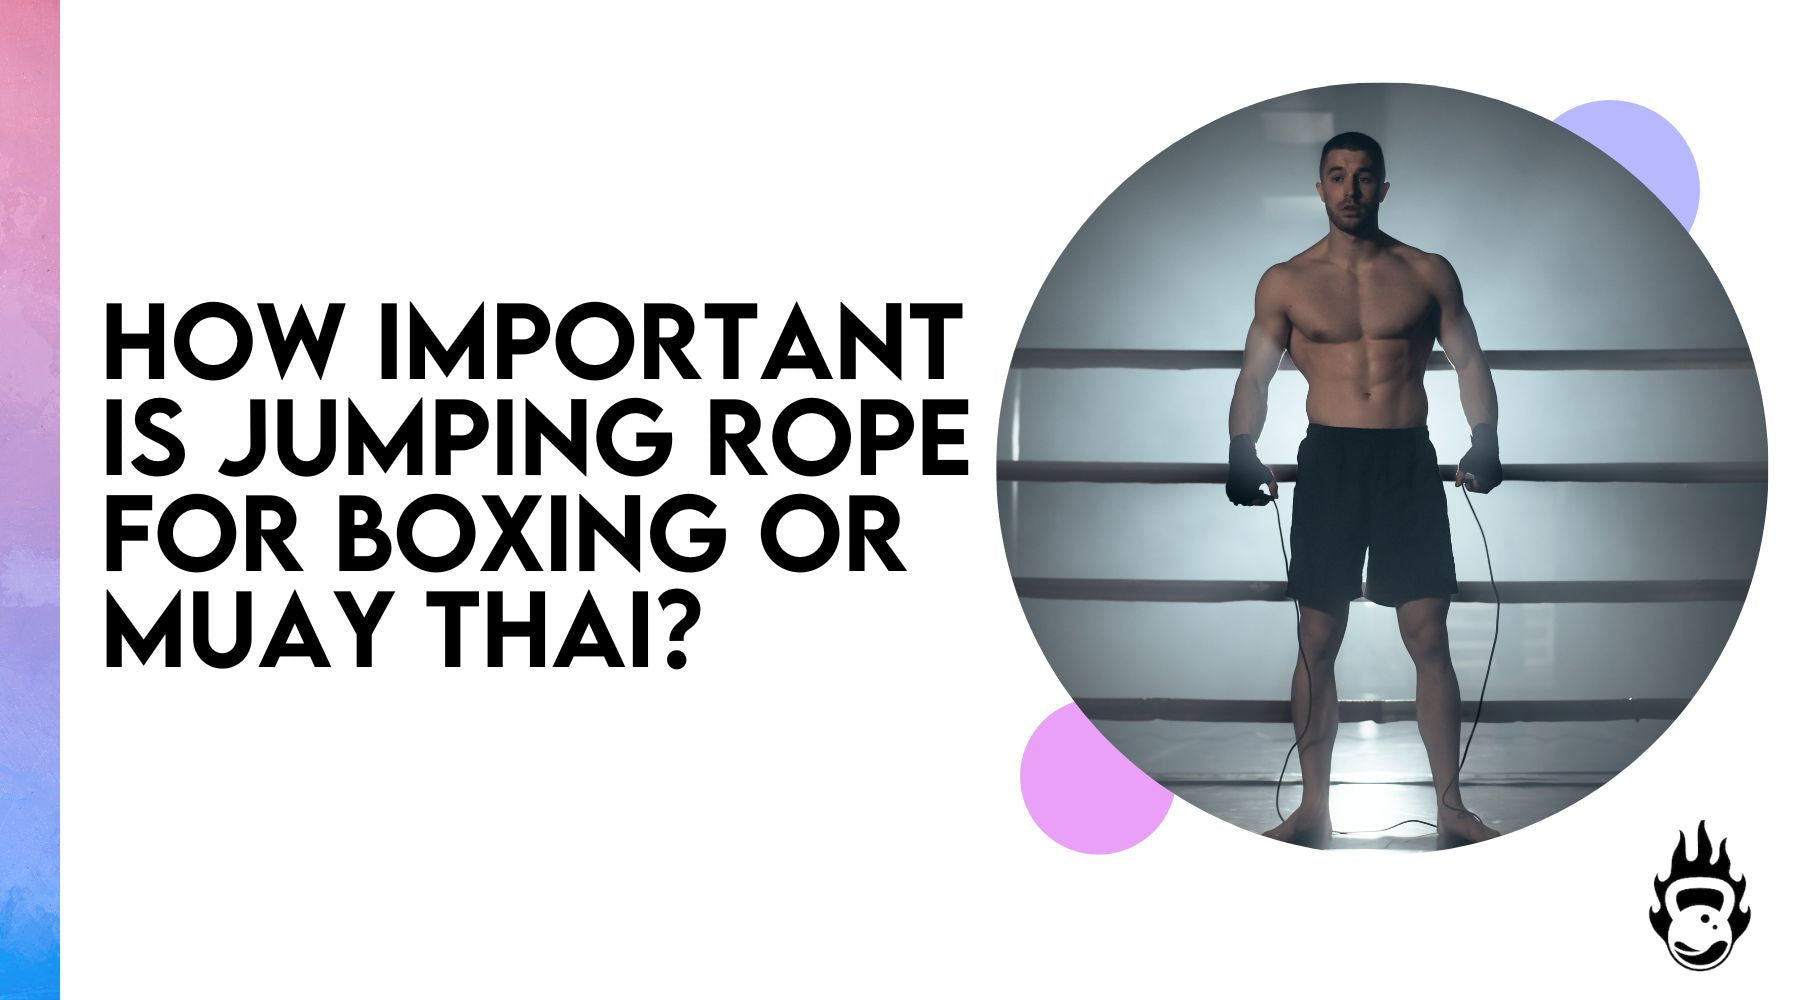 How important is jumping rope for boxing or Muay Thai?